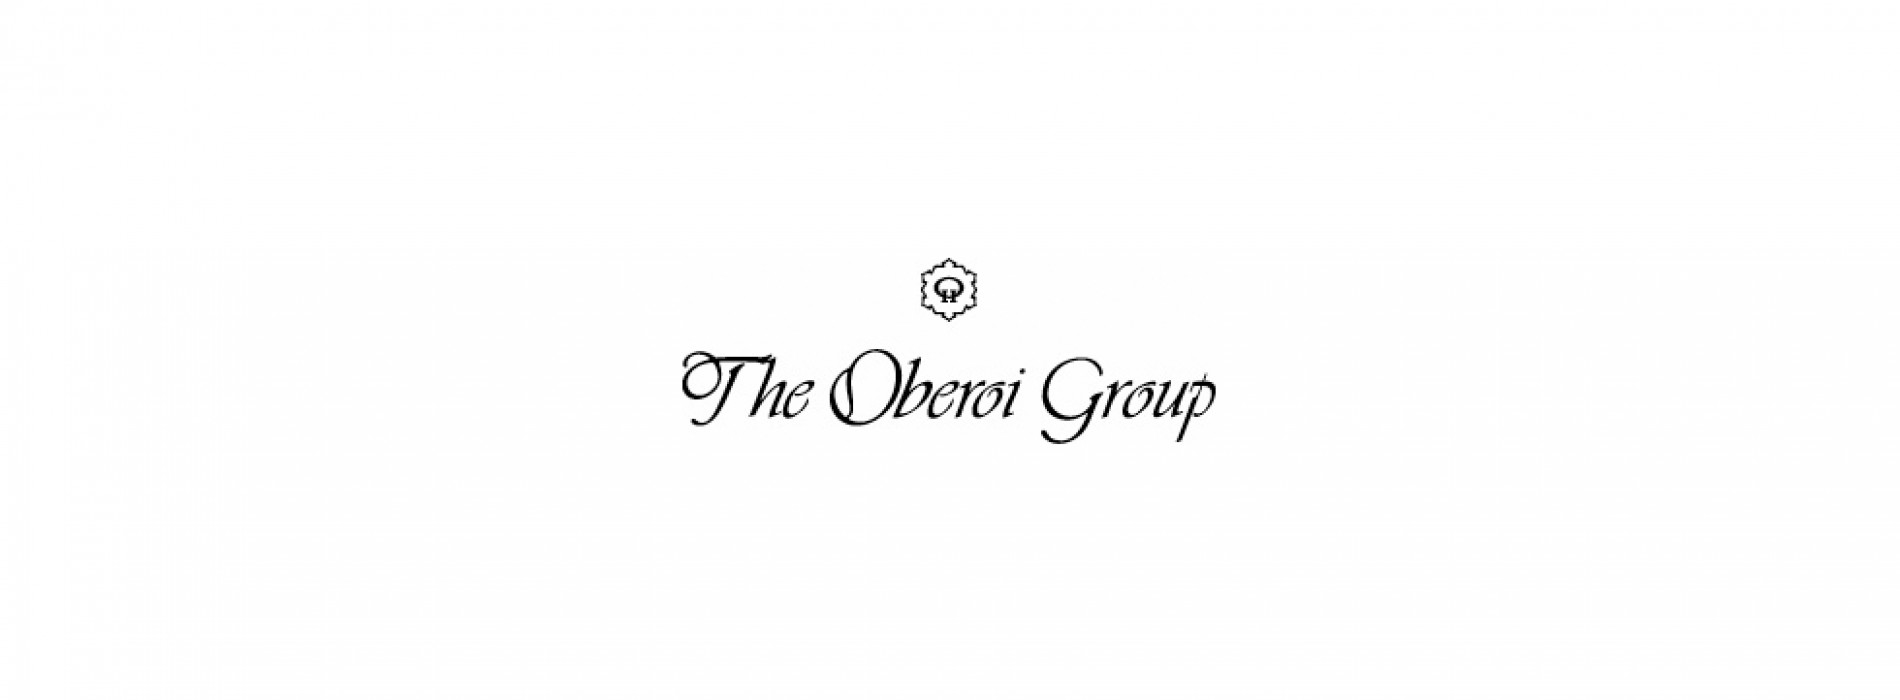 Special offers by the Oberoi group for its Mauritius and Dubai property